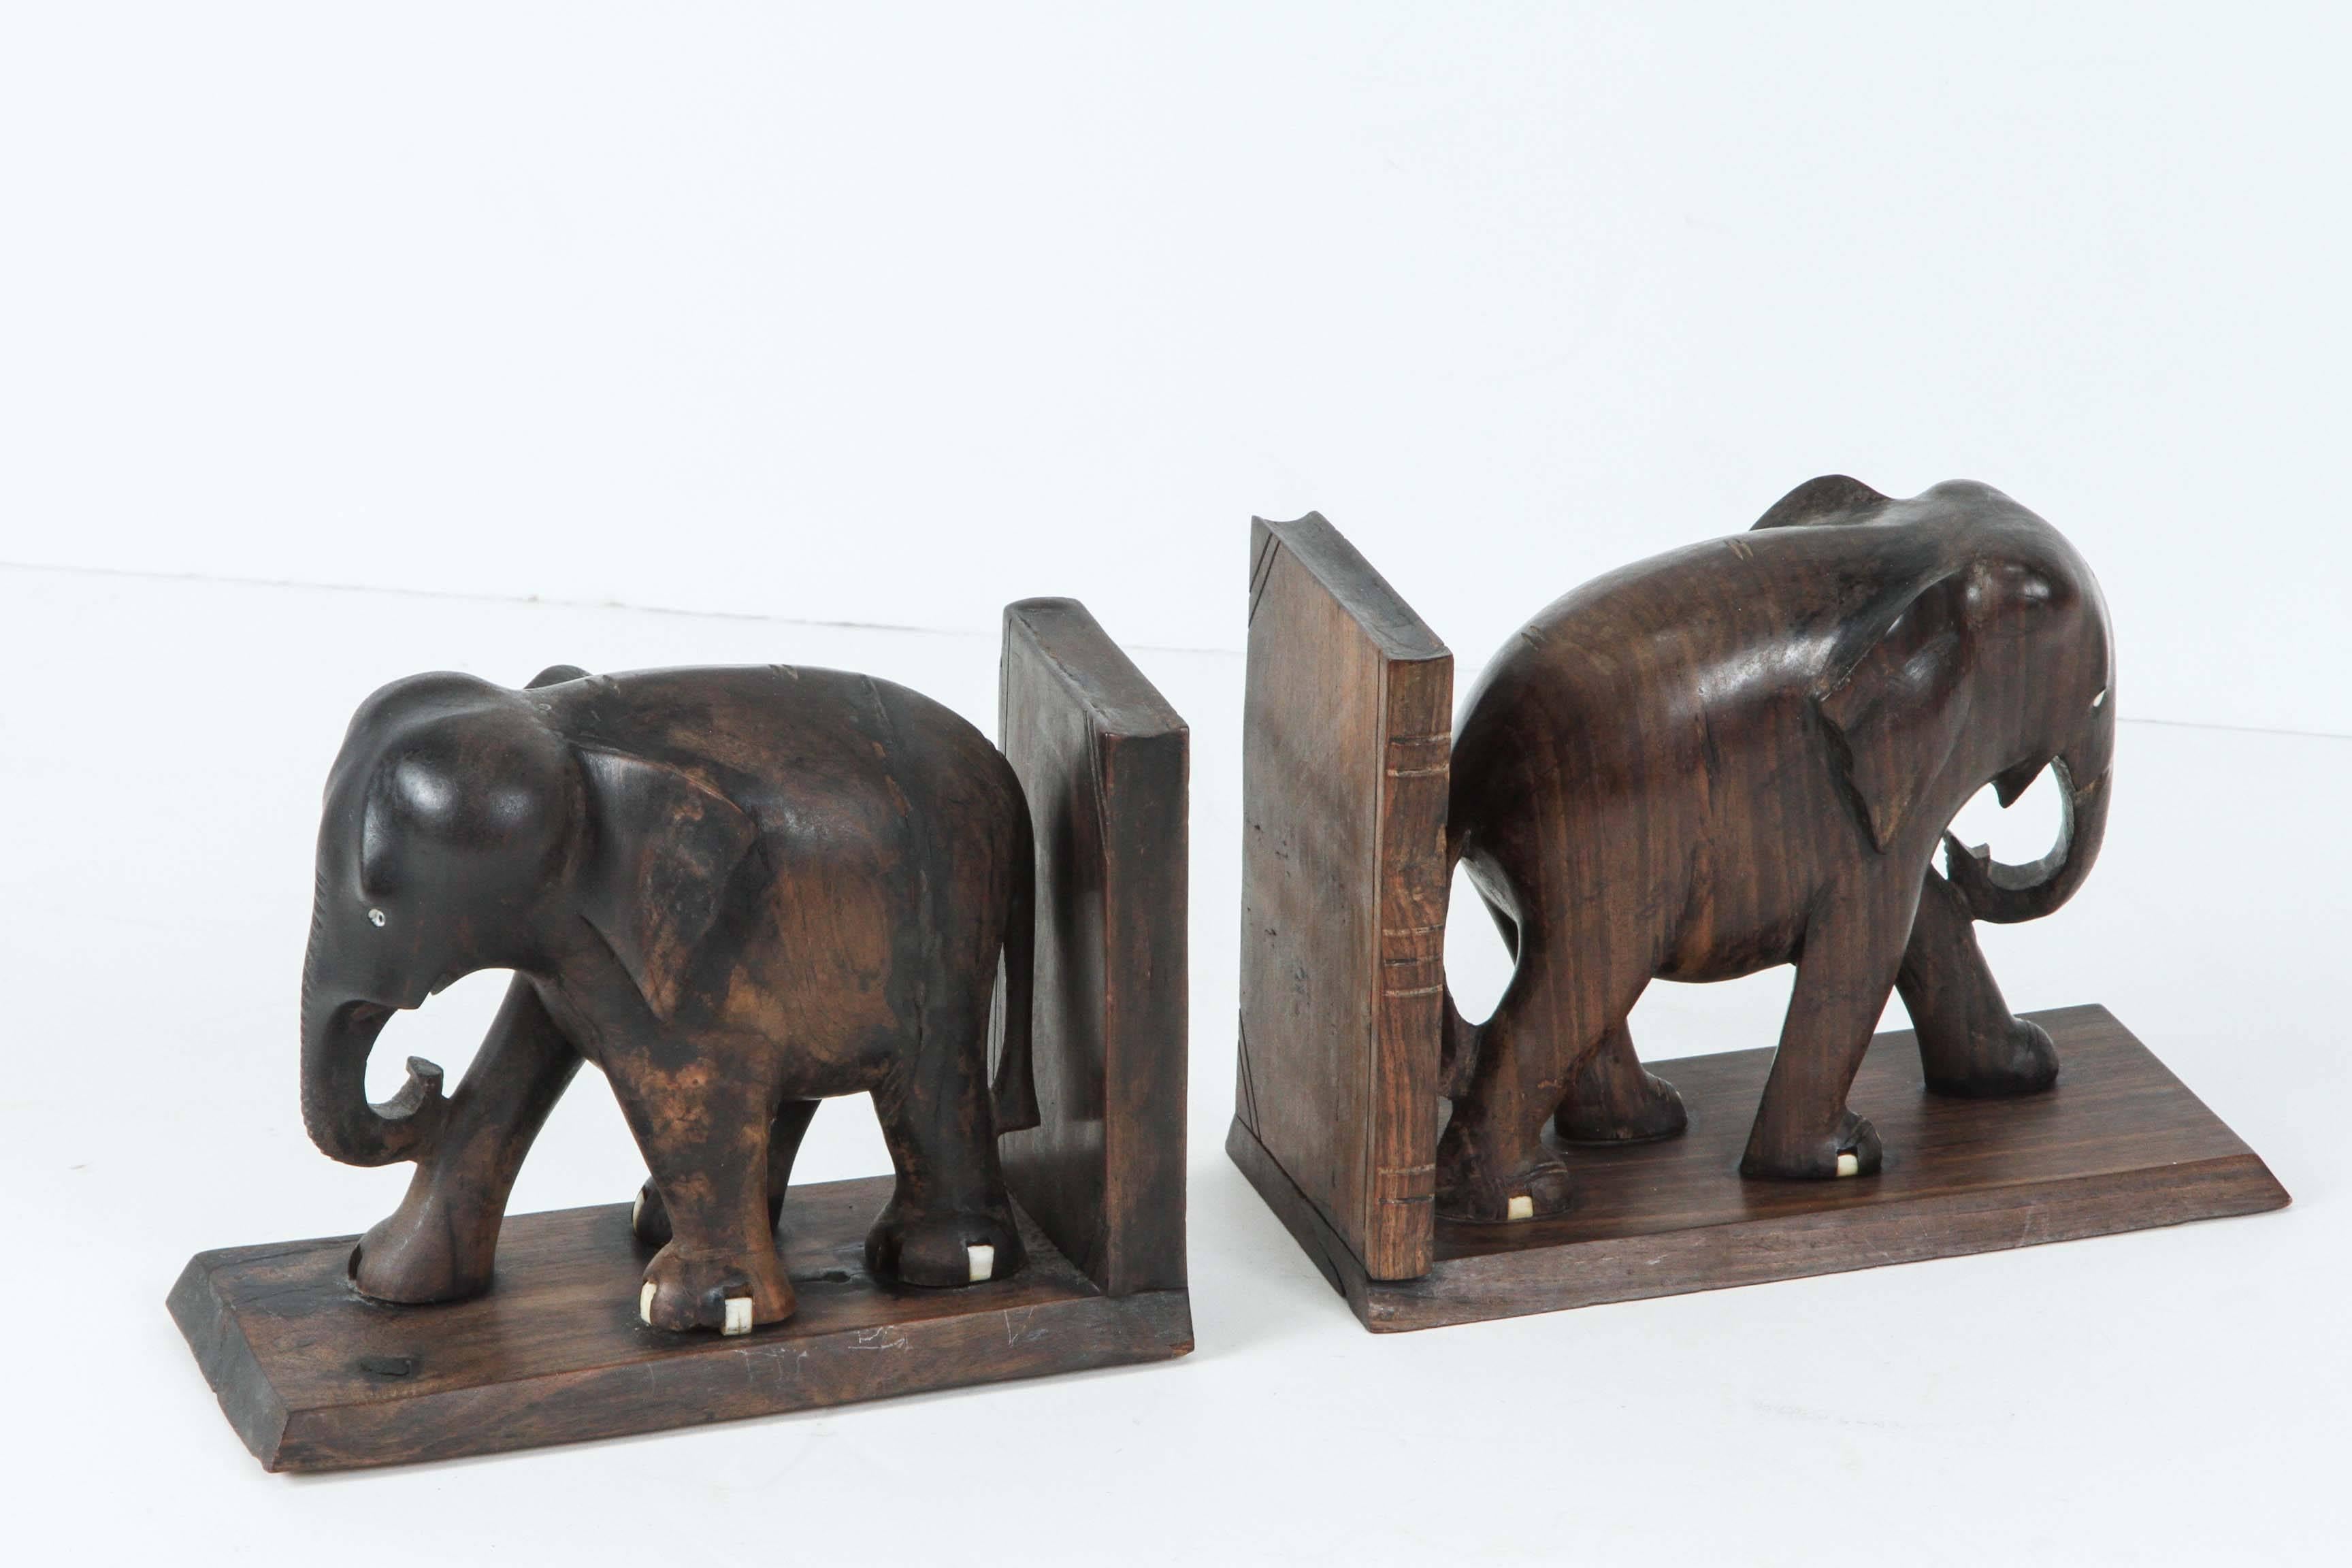 Nice pair of hand-carved ebony elephant bookends.
Bone accent in eyes and feet, no tusks.